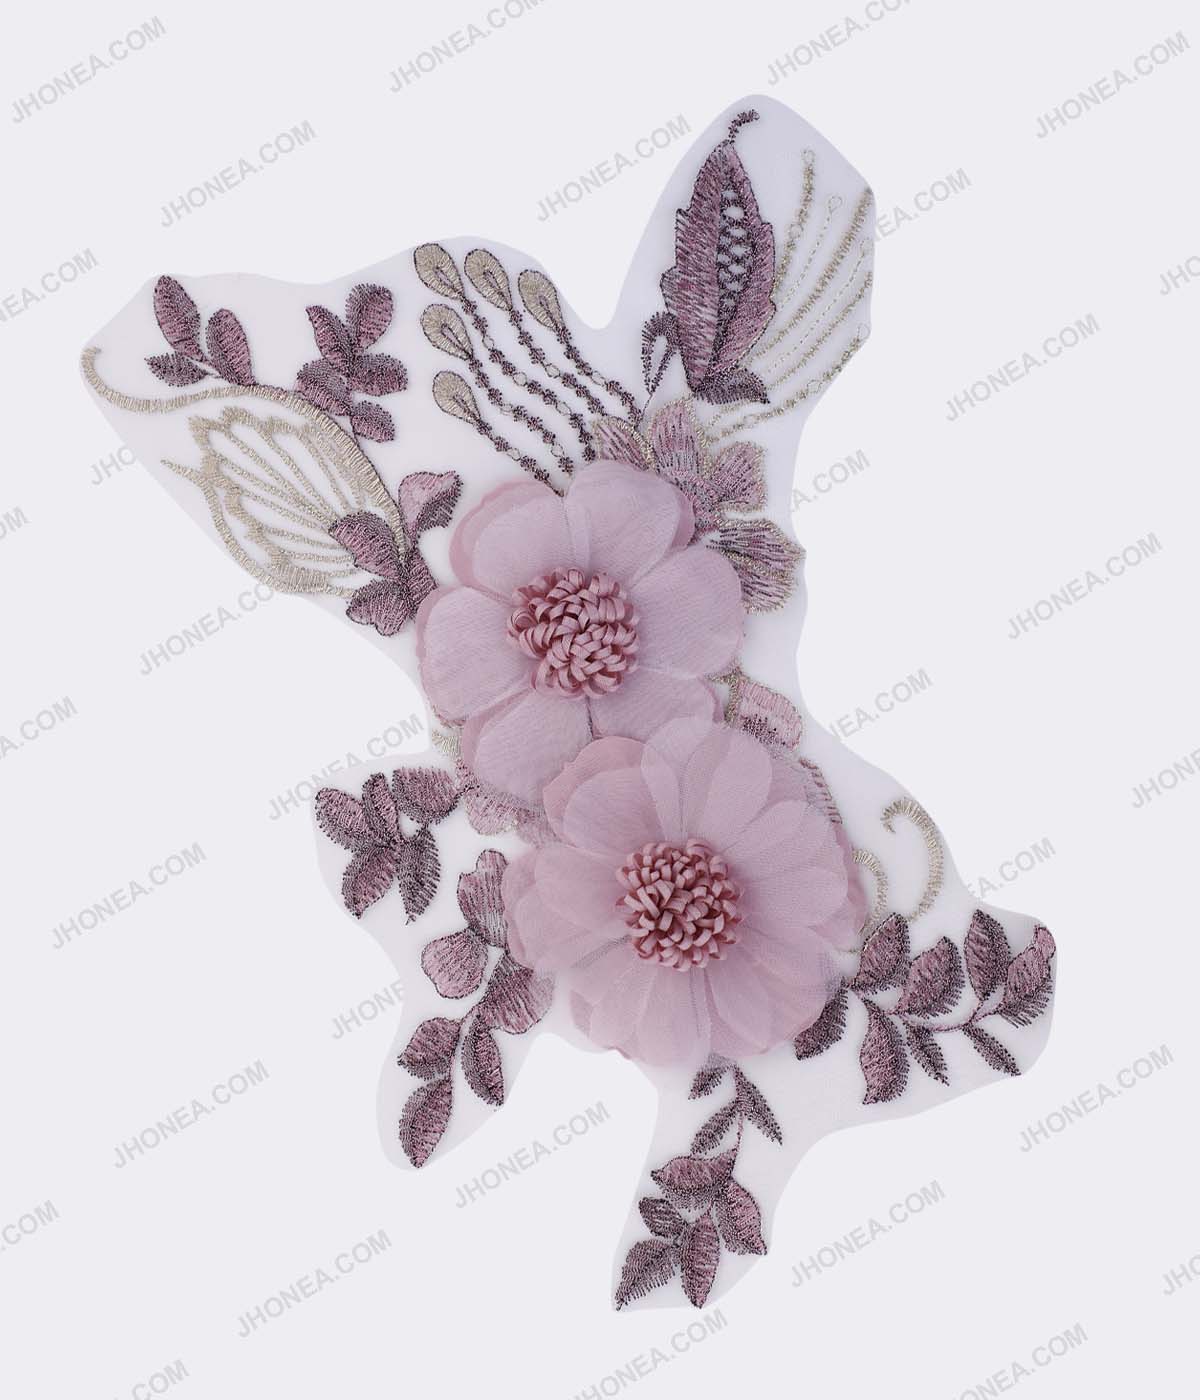 Flower Applique Patches Iron On Flower Patches India